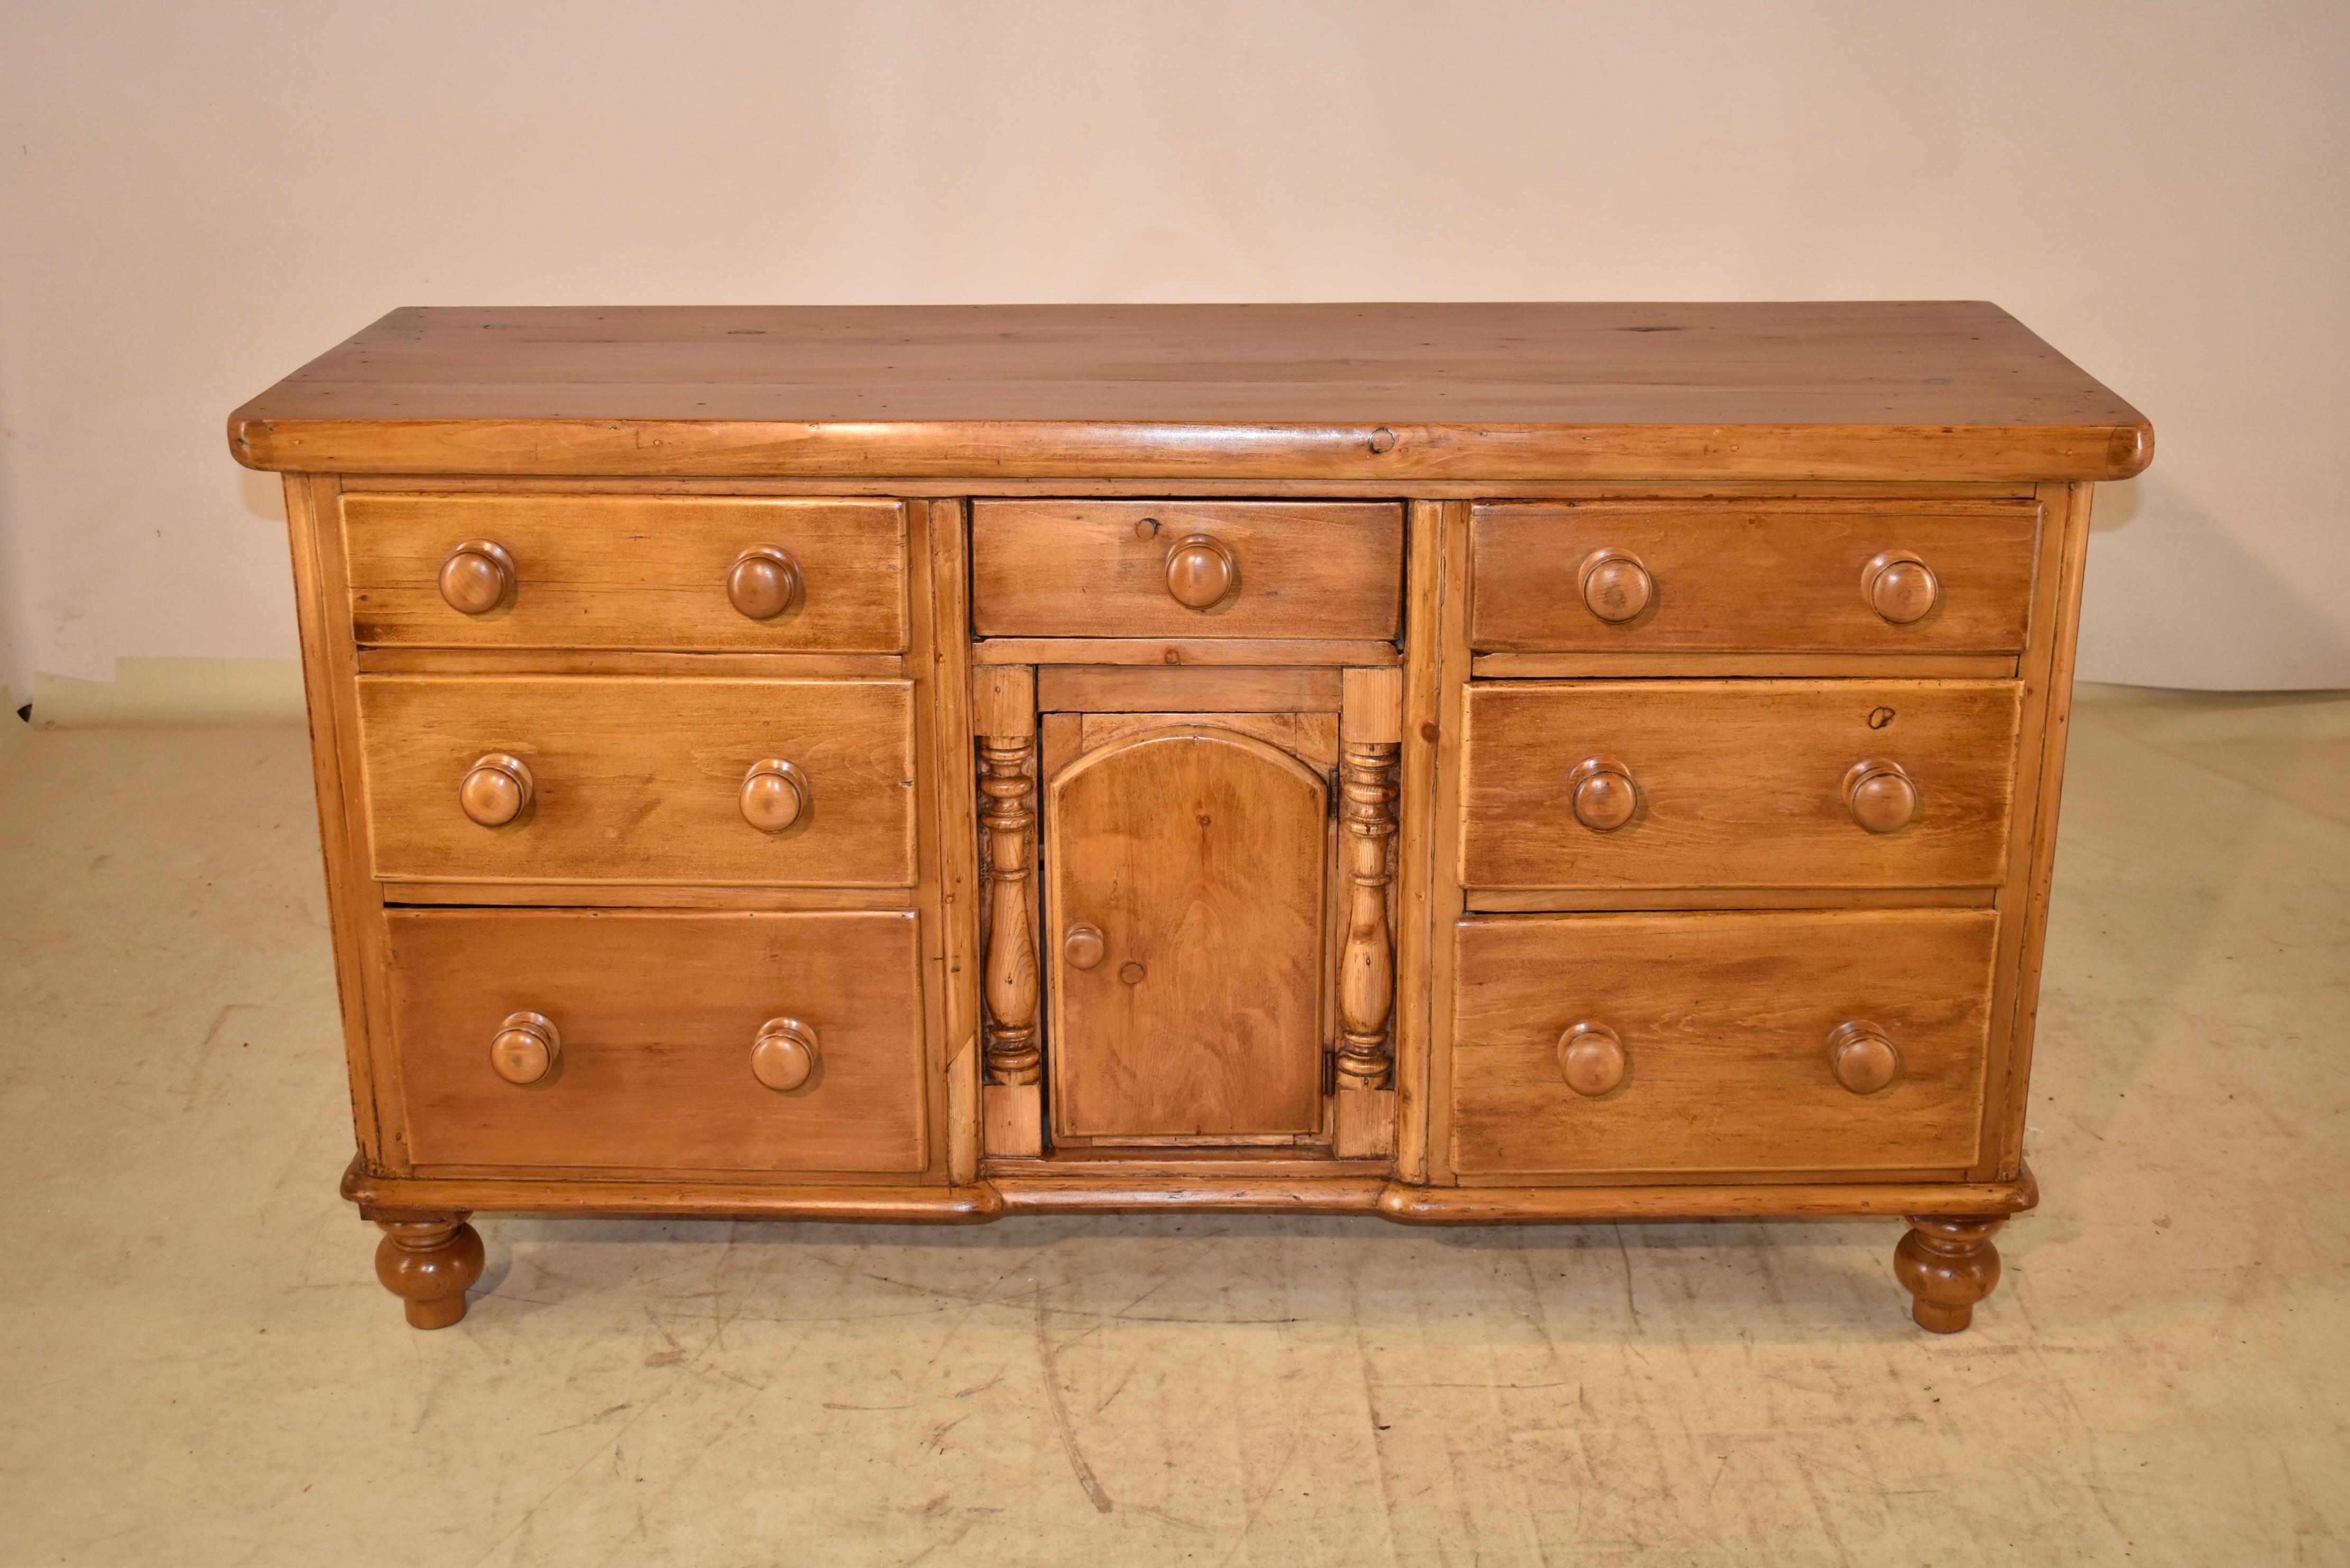 19th Century English Pine Dresser Base In Good Condition For Sale In High Point, NC